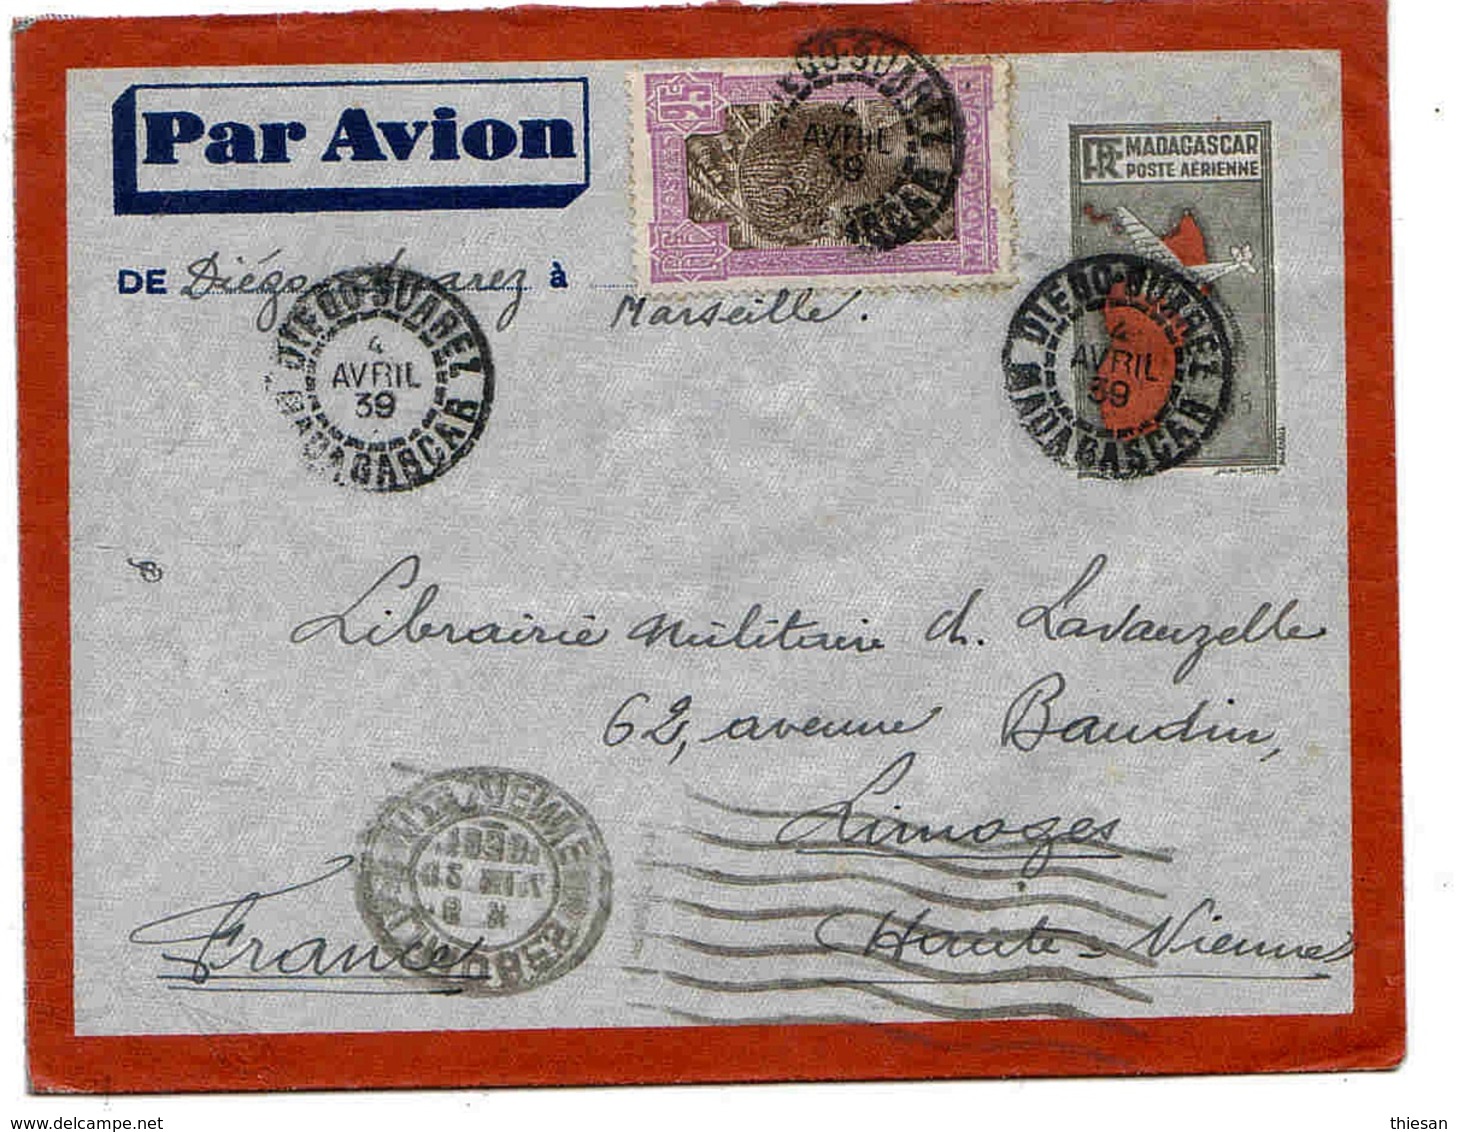 Madagascar Lettre Entier Avion Airmail Stationary Diego-Suarez 4 Avril 1939 Cover - Covers & Documents